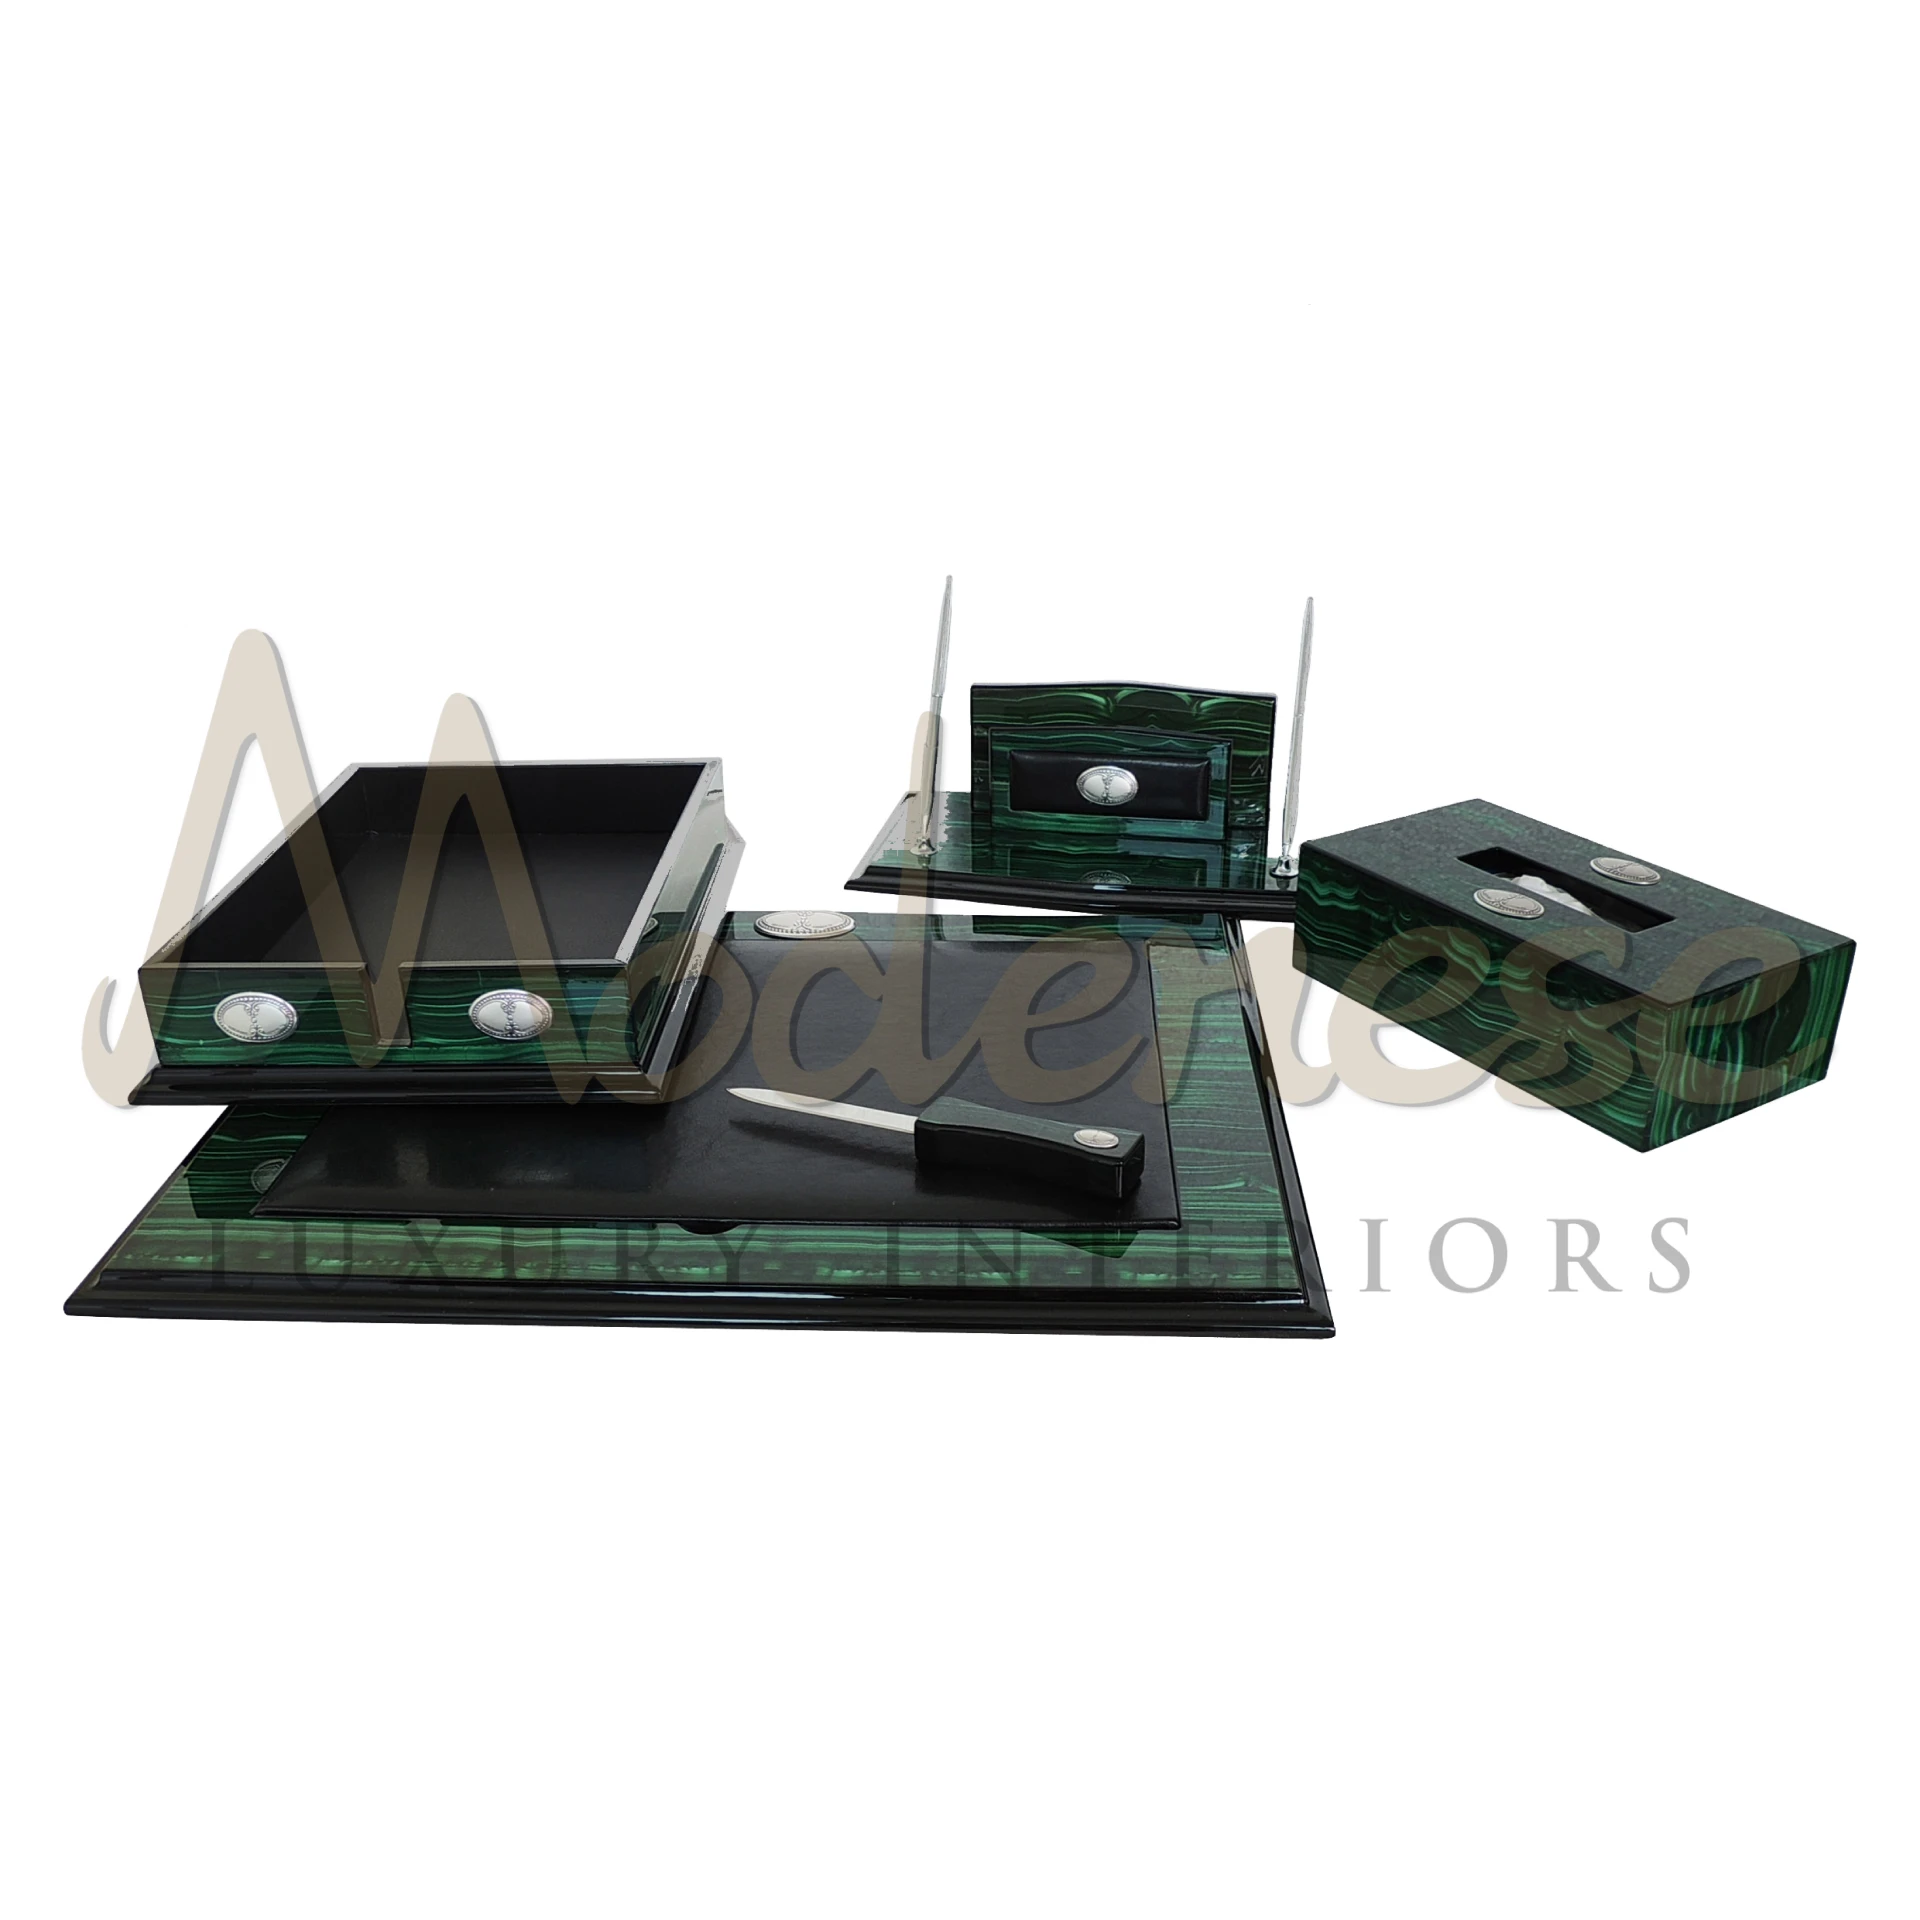 Dark Green Writing Desk Set from Modenese, featuring elegant office accessories for a cohesive and luxurious workspace in classic and baroque style.






